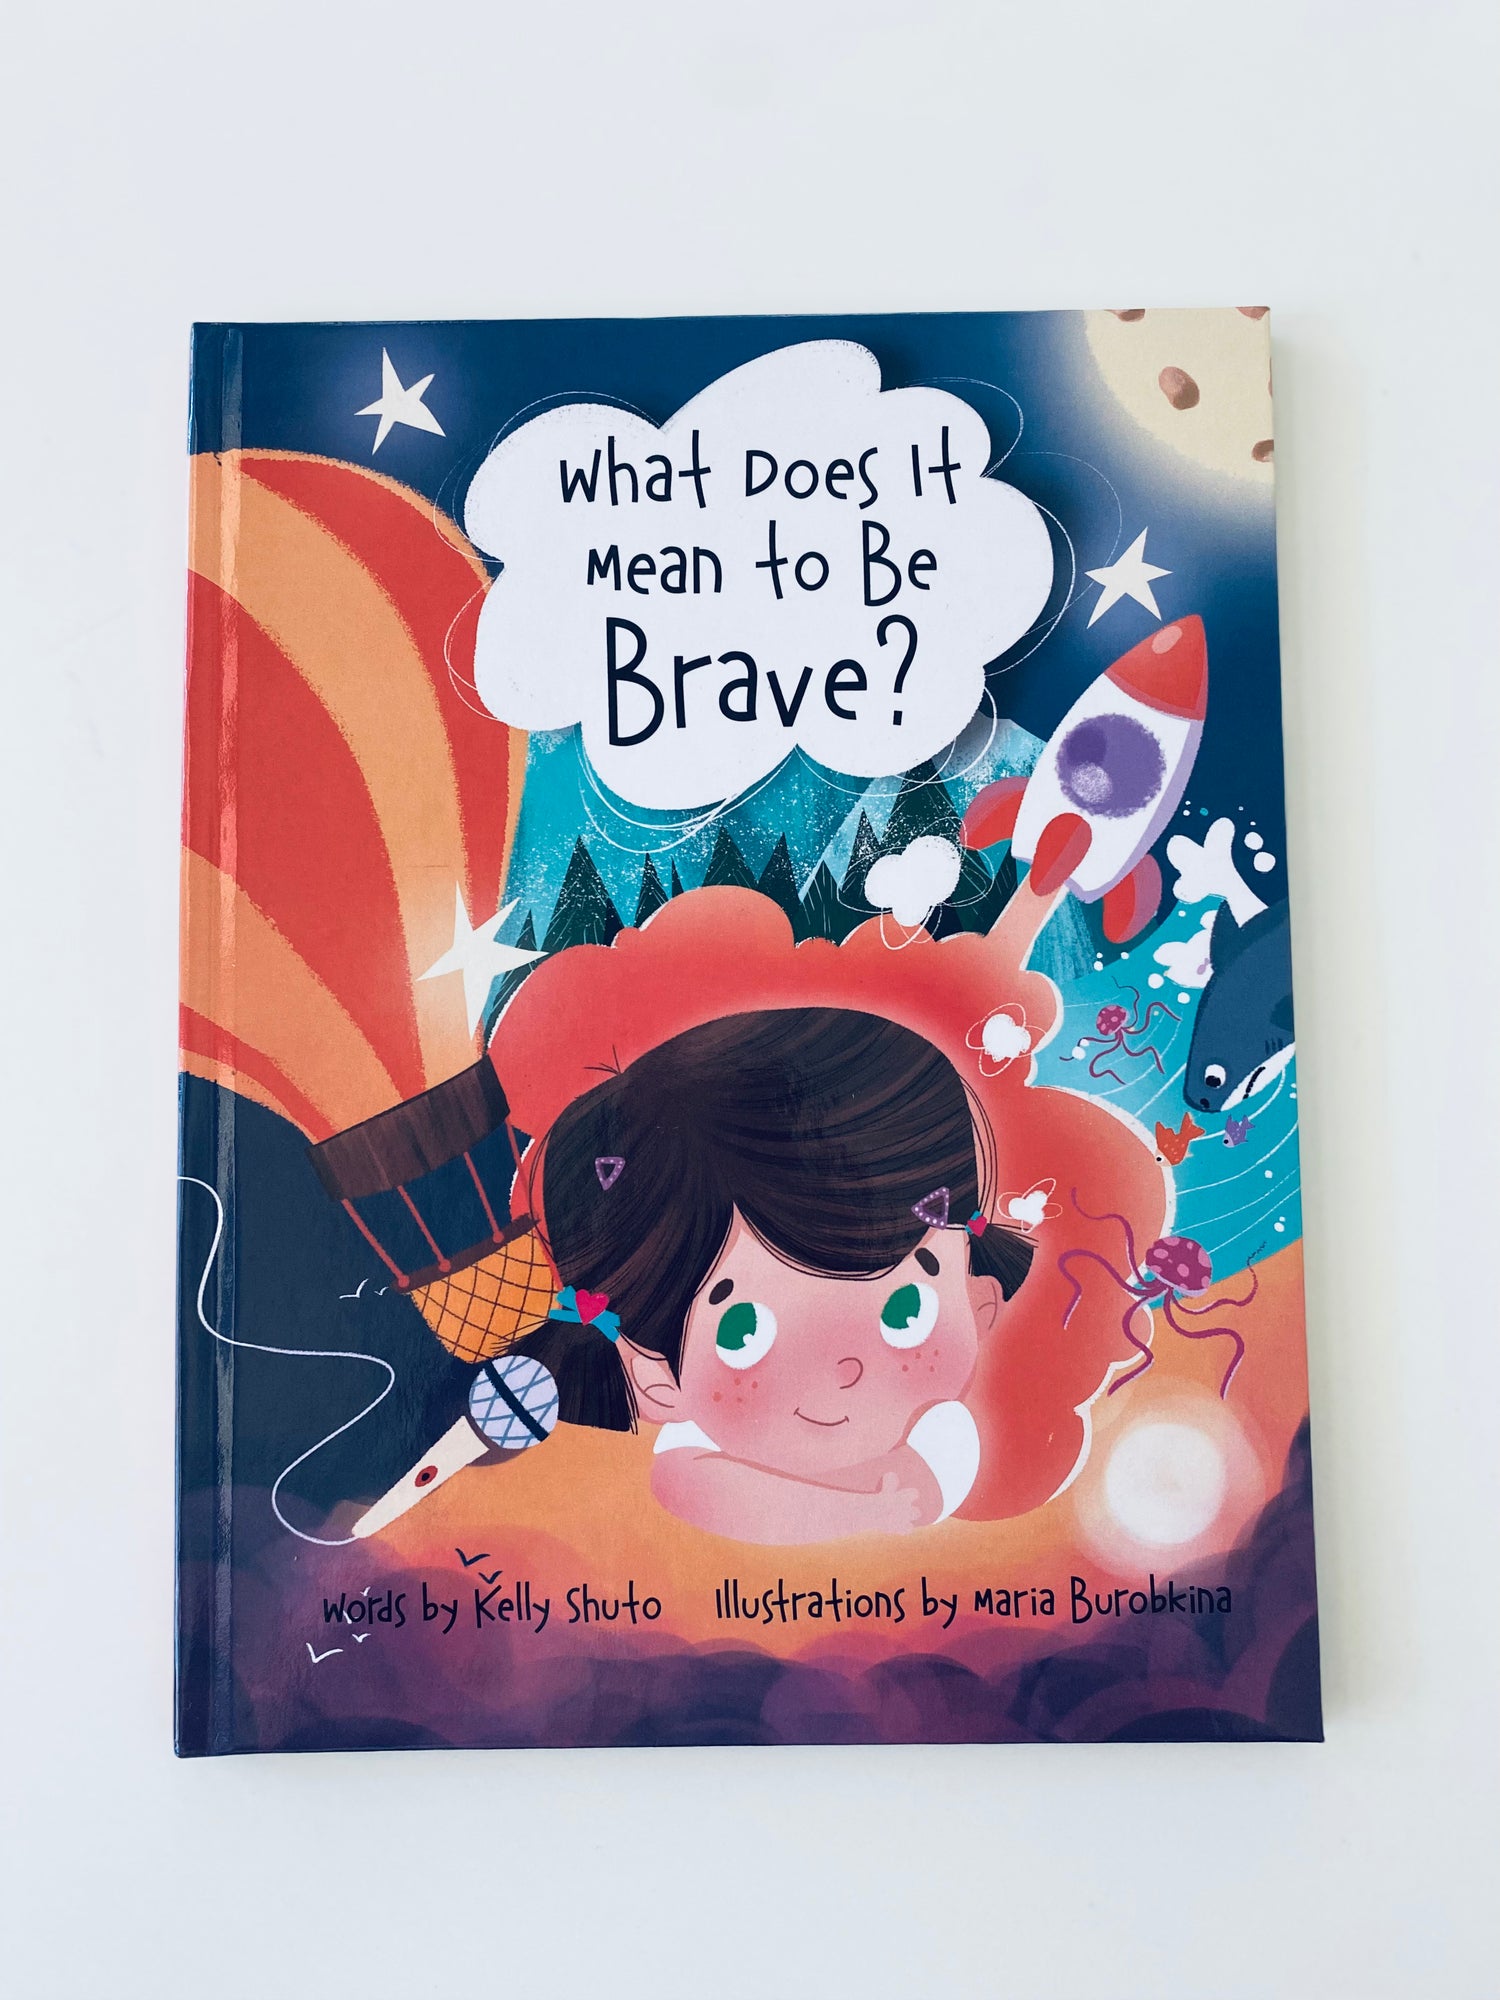 What Does It Mean to be Brave? (C'est quoi, le courage?)